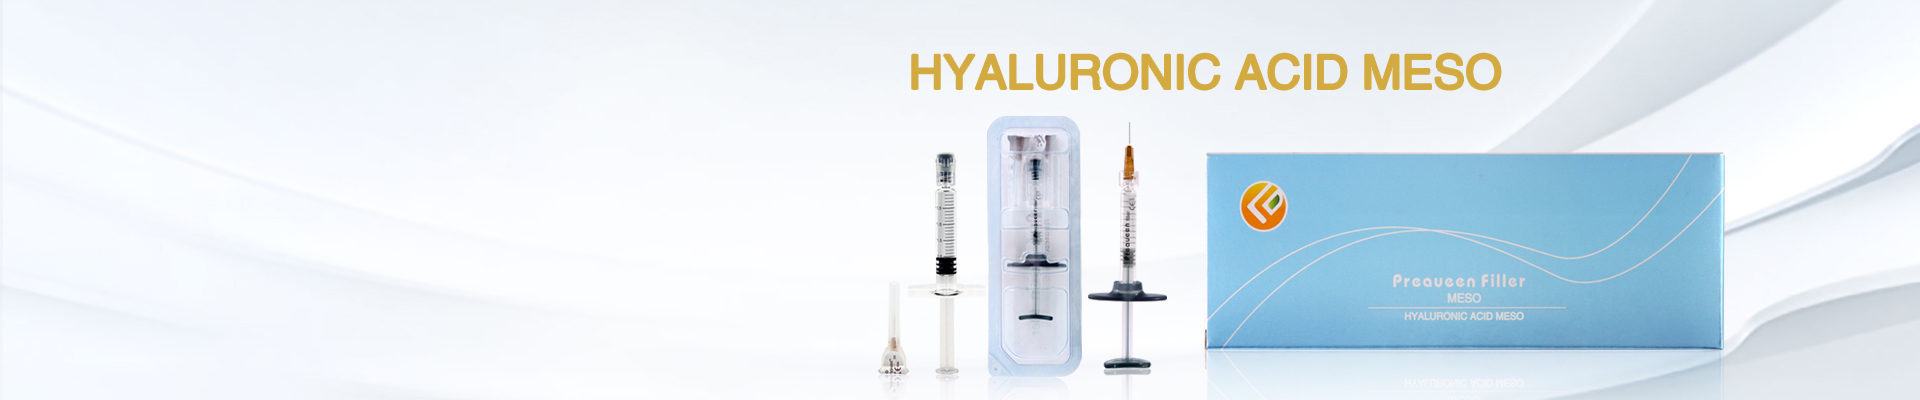 Hyaluronic mesotheraphy Professional Manufacturer&supplier